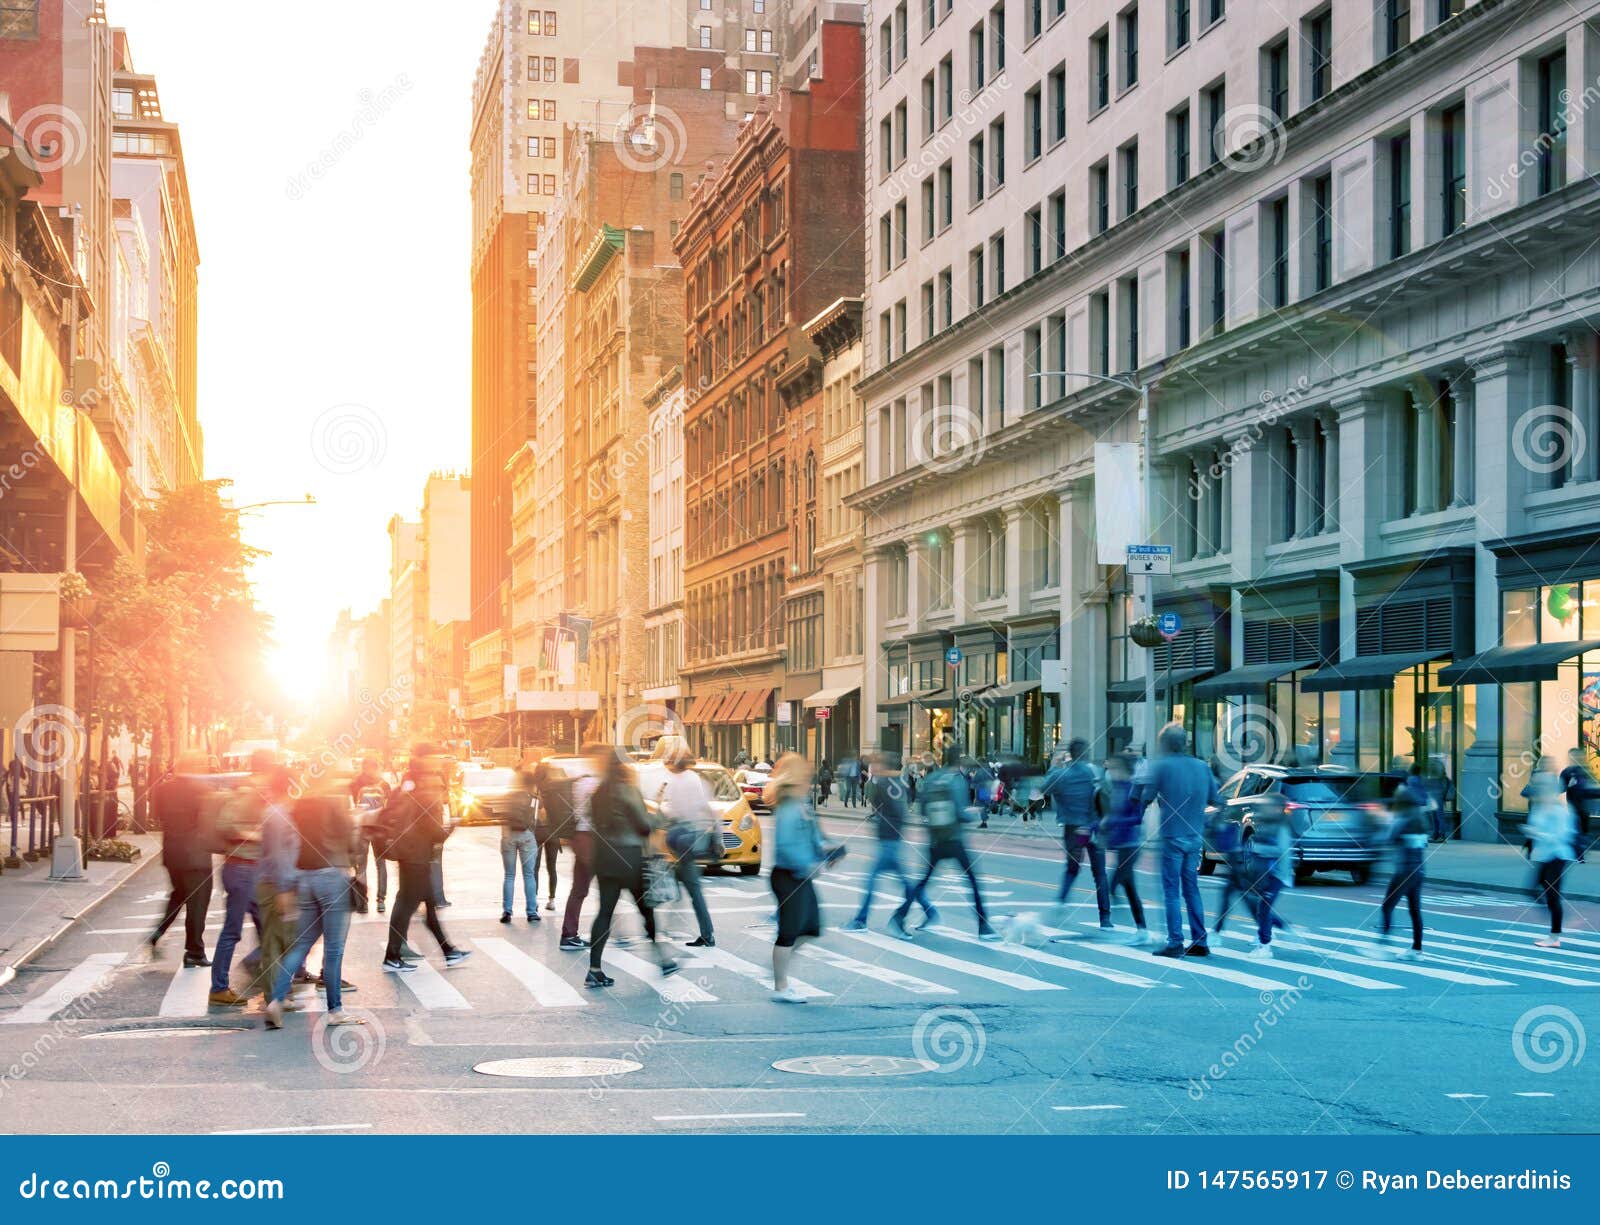 crowds of people walking across the busy intersection in midtown manhattan, new york city